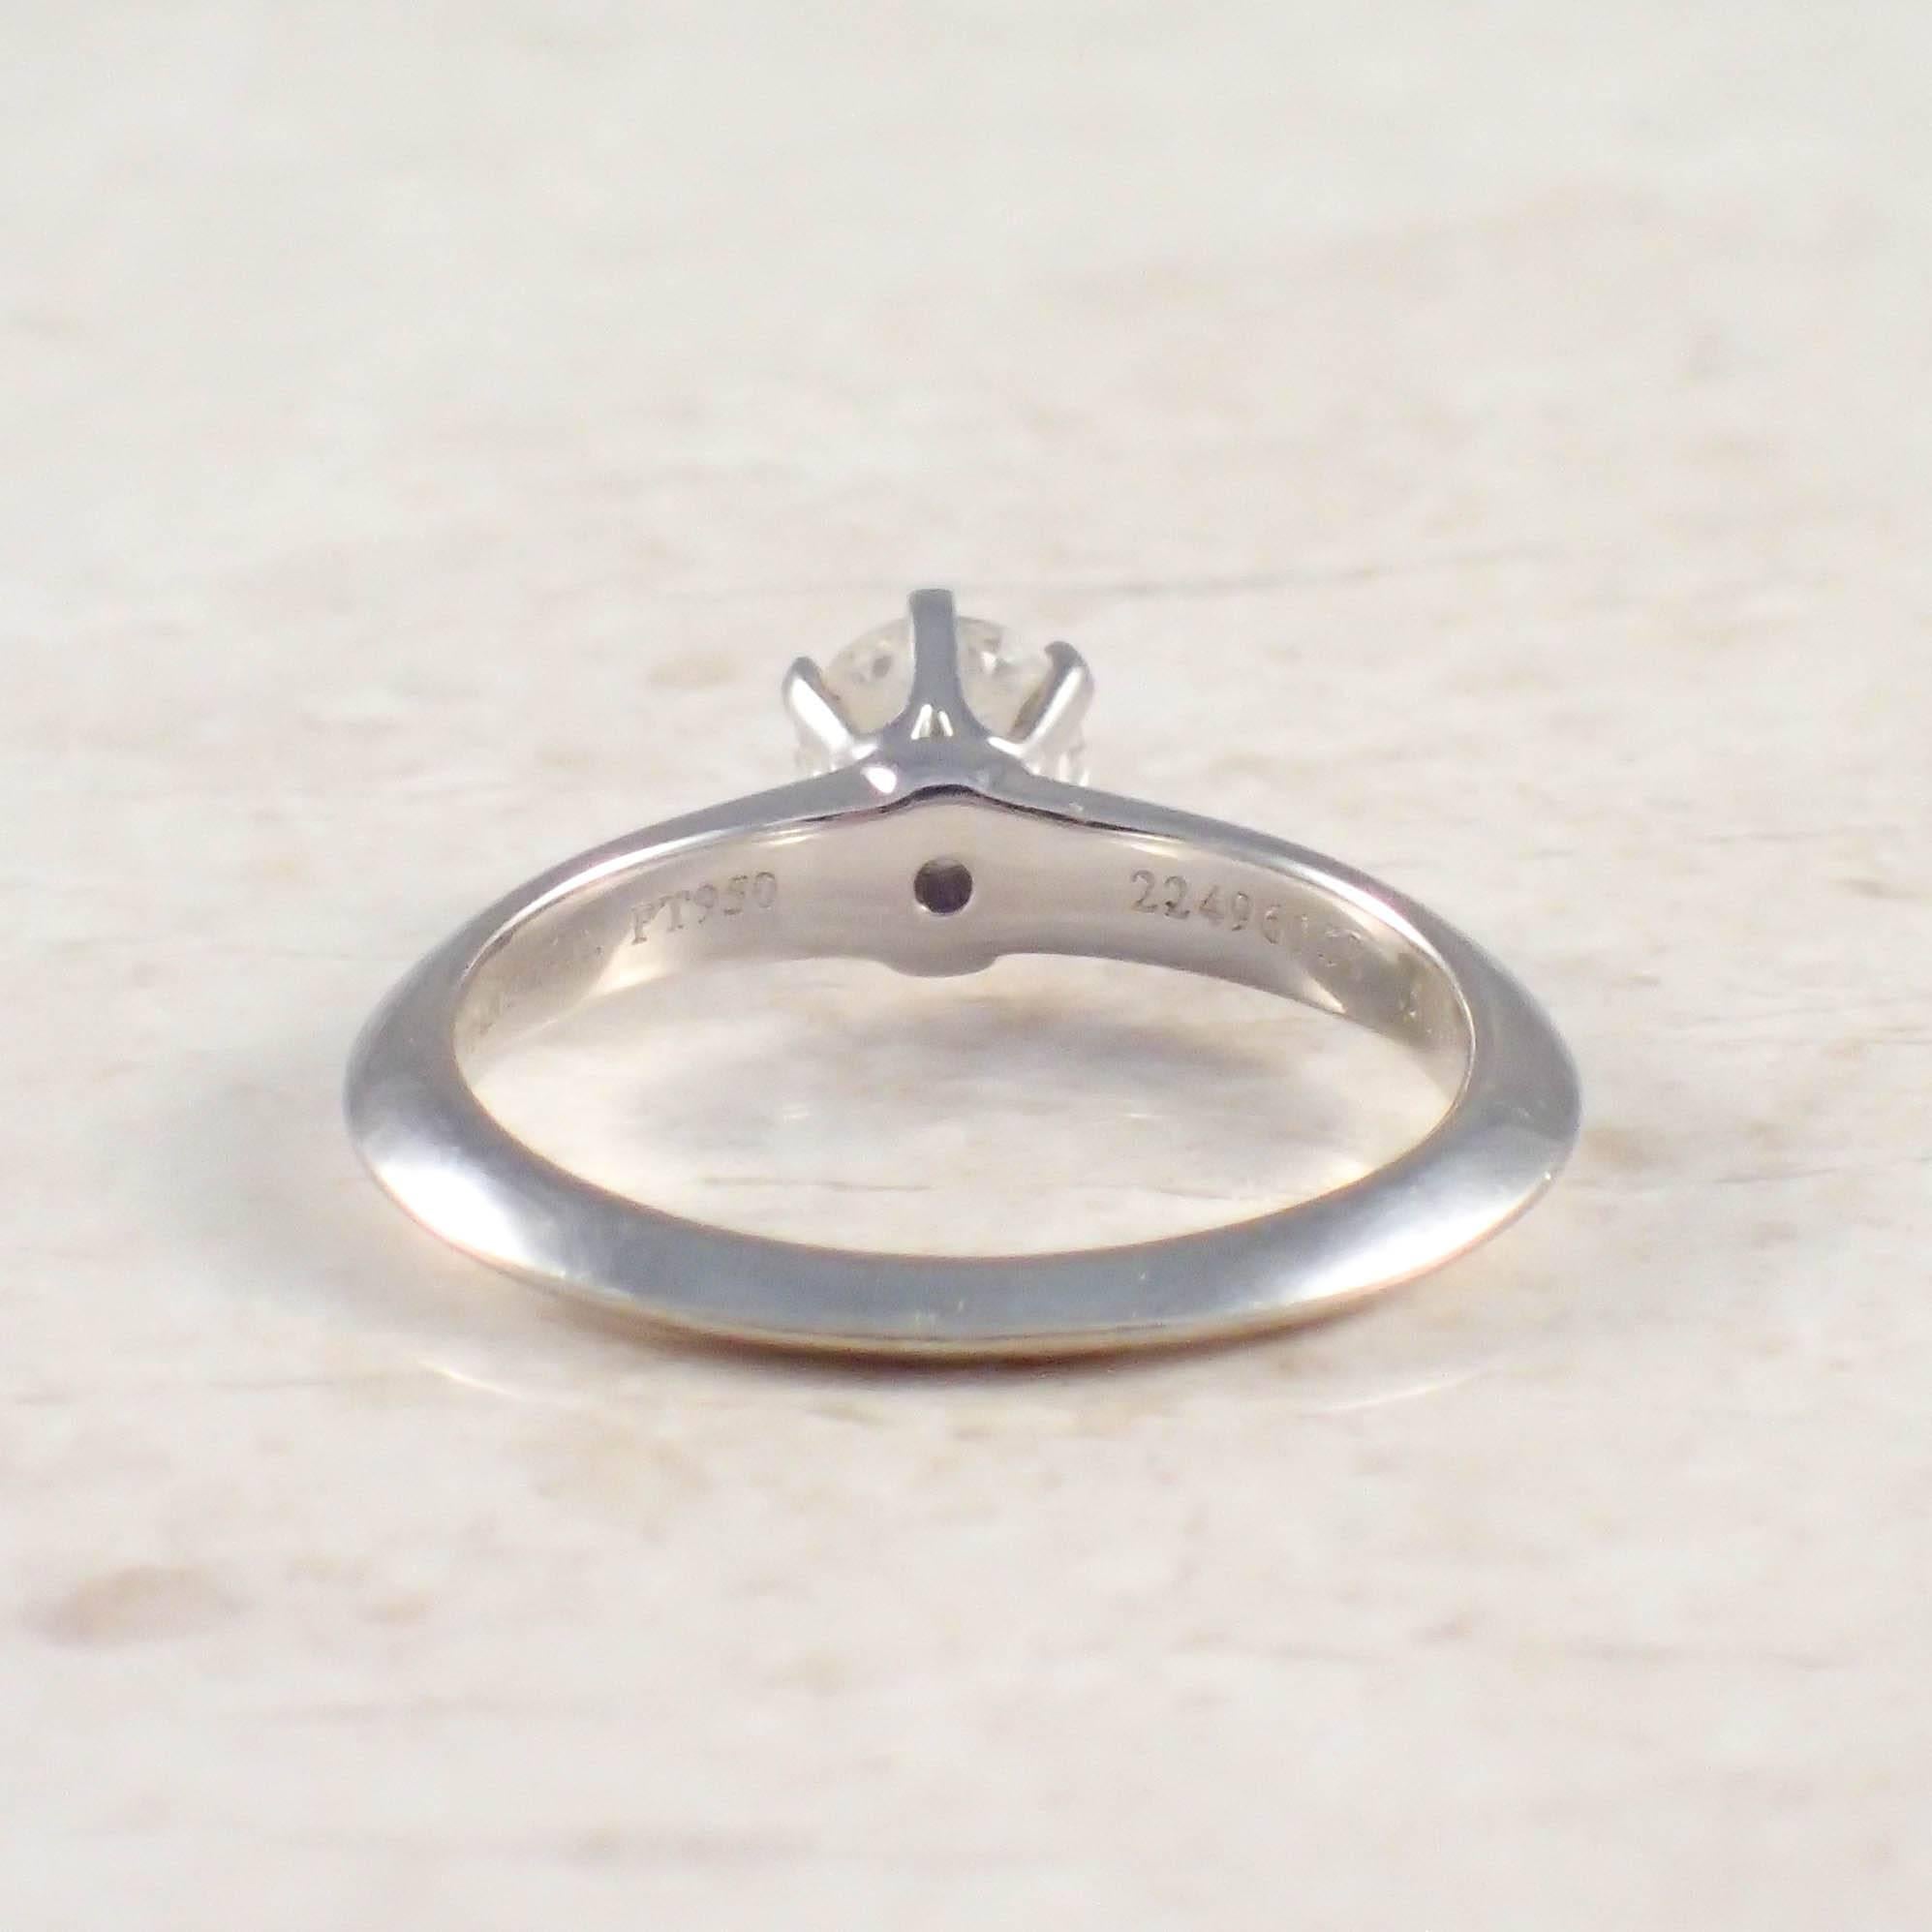 Tiffany & Co. Diamond Platinum Solitaire Engagement Ring  In Good Condition For Sale In Portland, ME